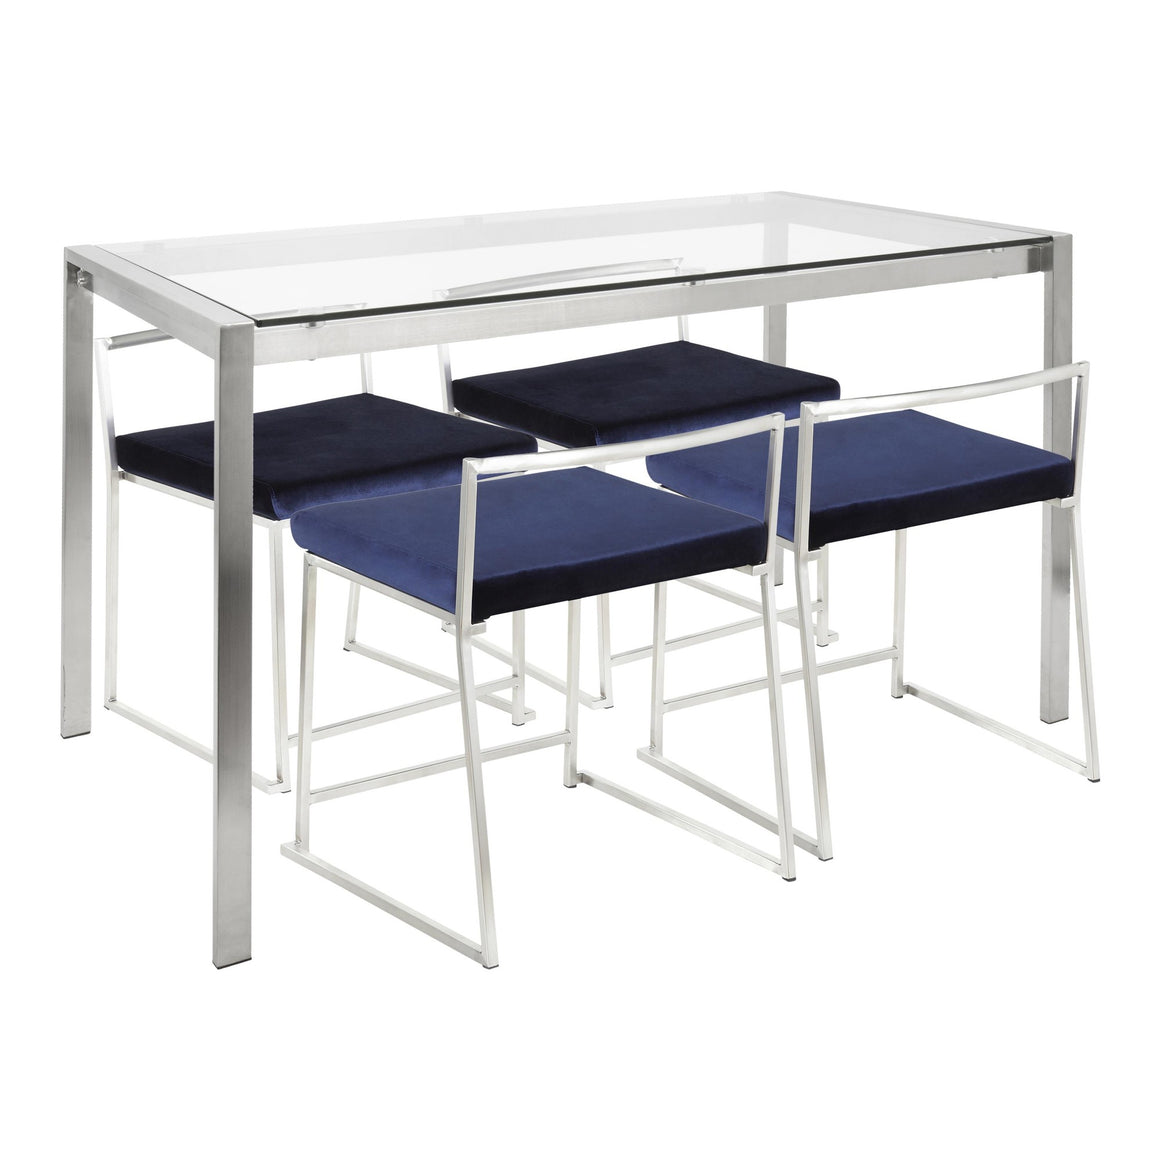 Fuji 5-Piece Contemporary Dining Set in Stainless Steel and Blue Velvet Fabric by LumiSource